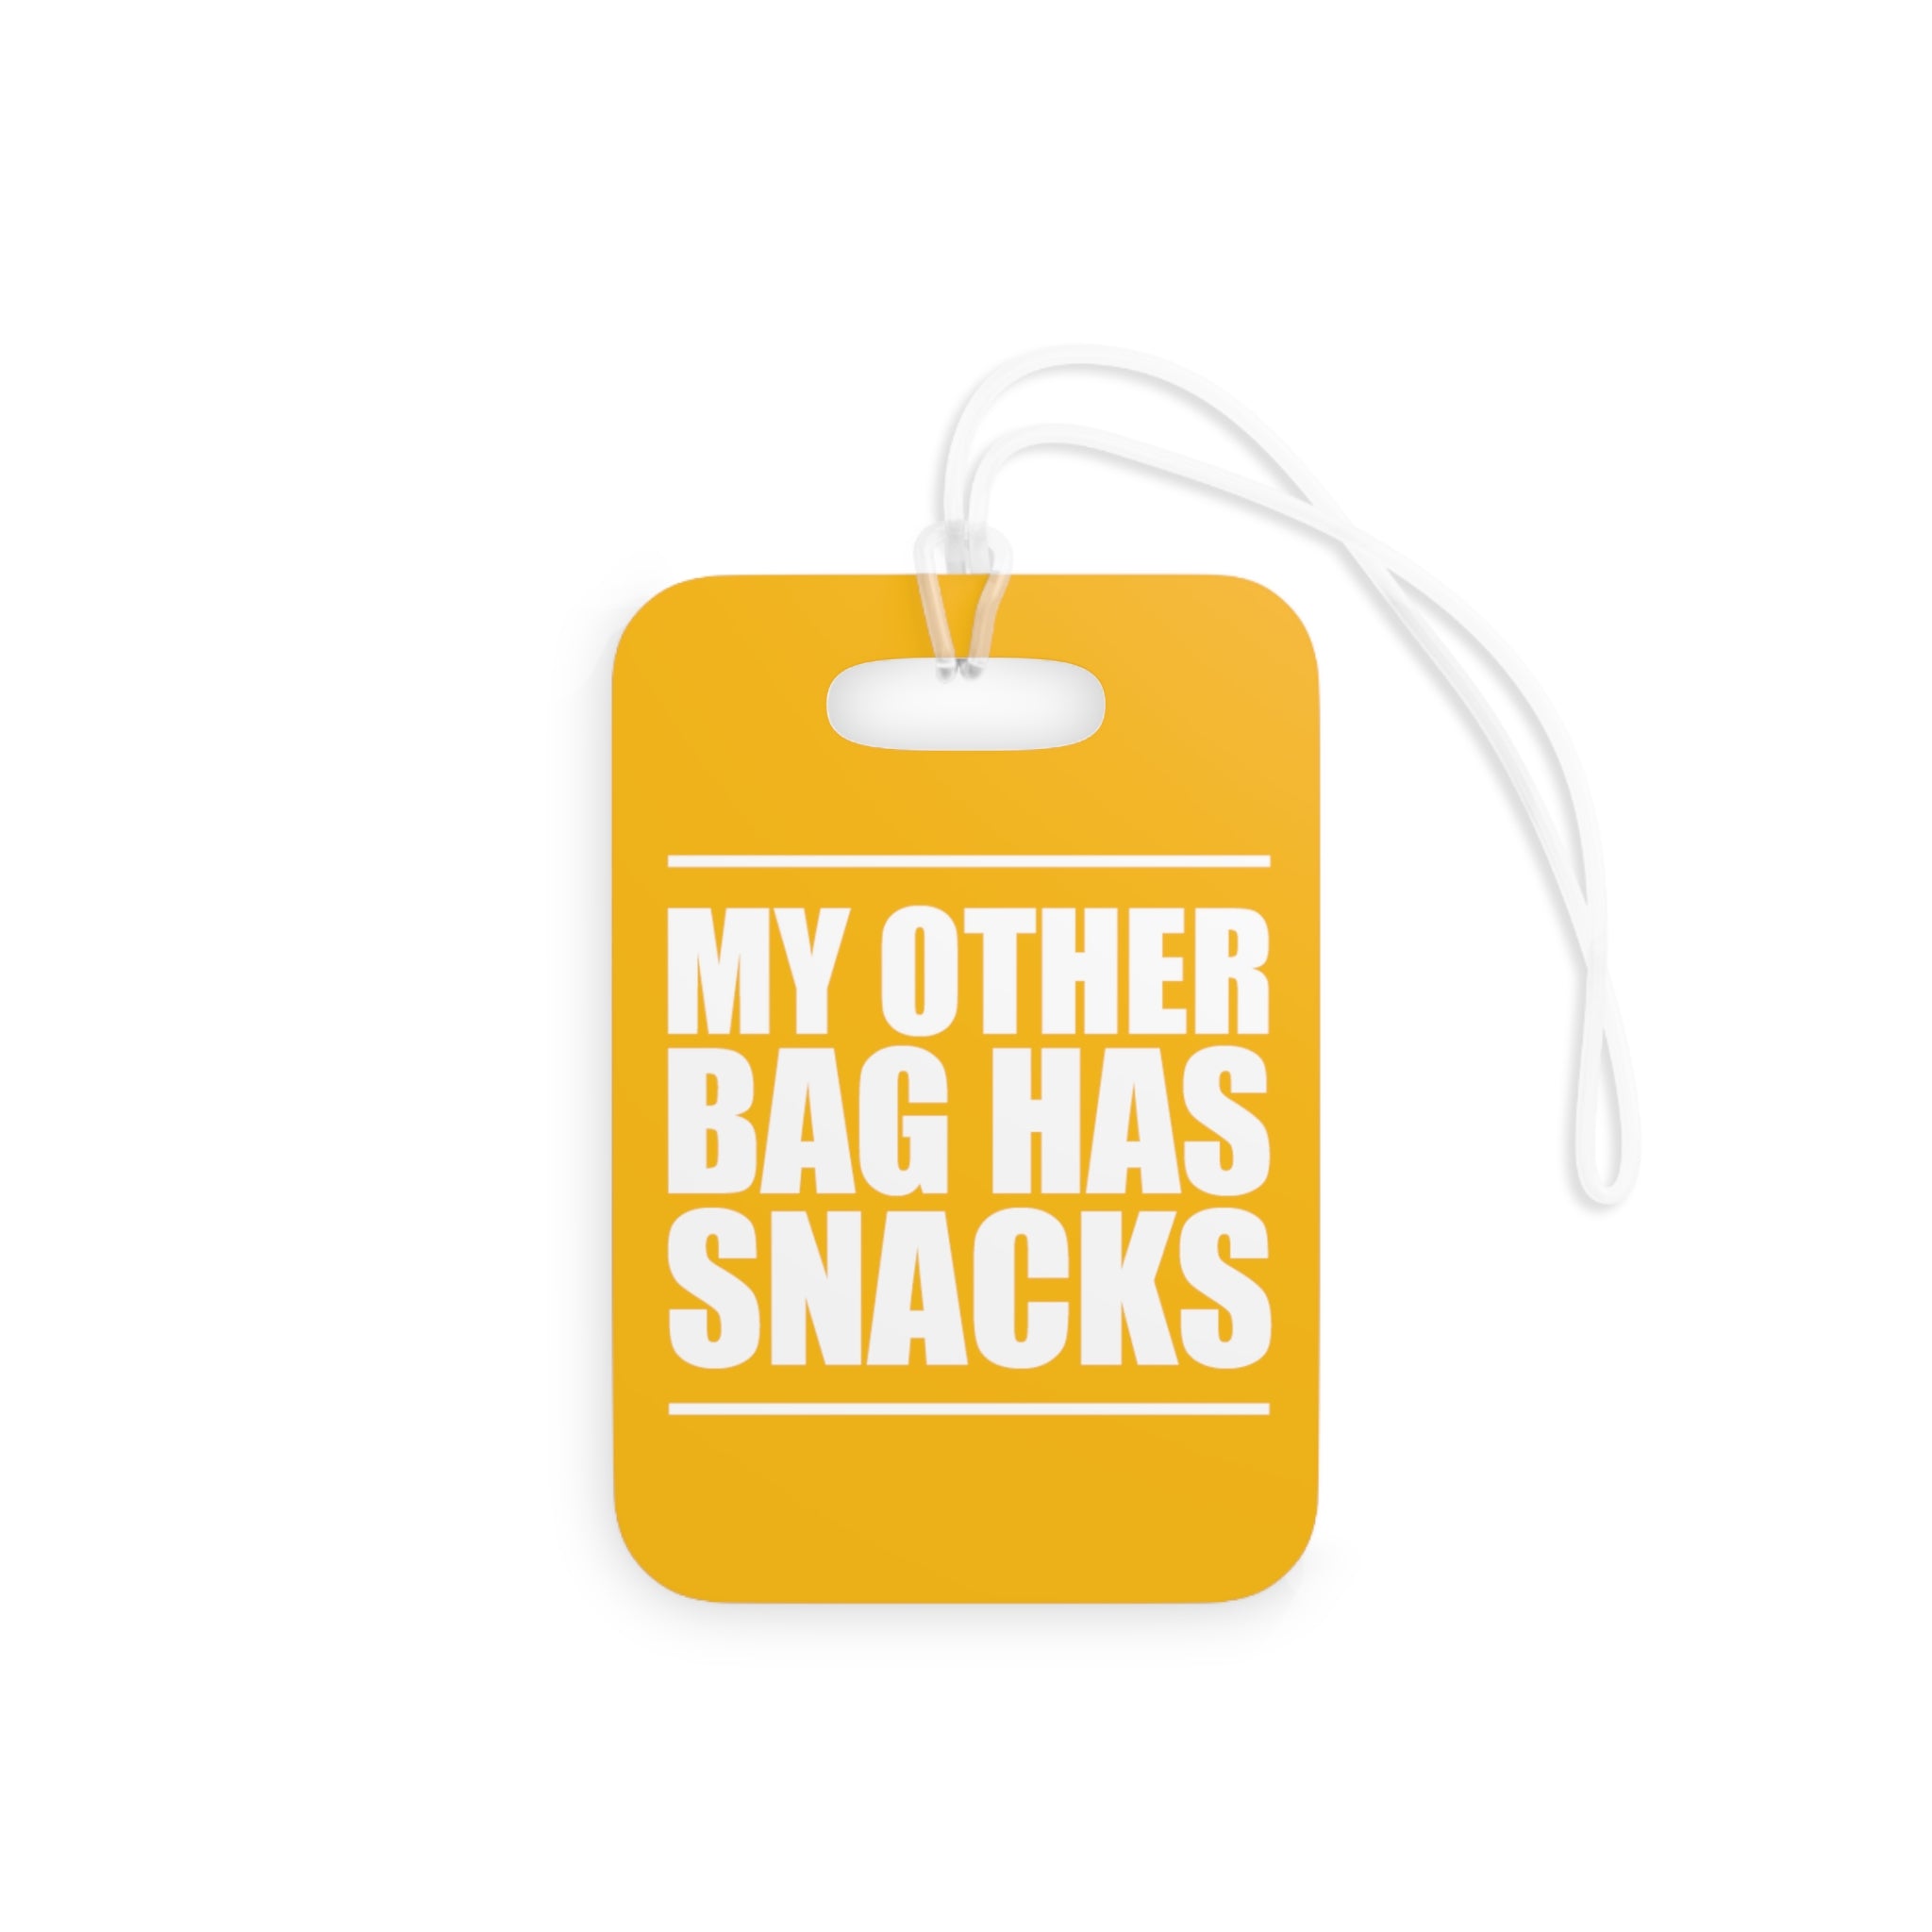 My other bag has snacks Luggage Tag (Yellow)